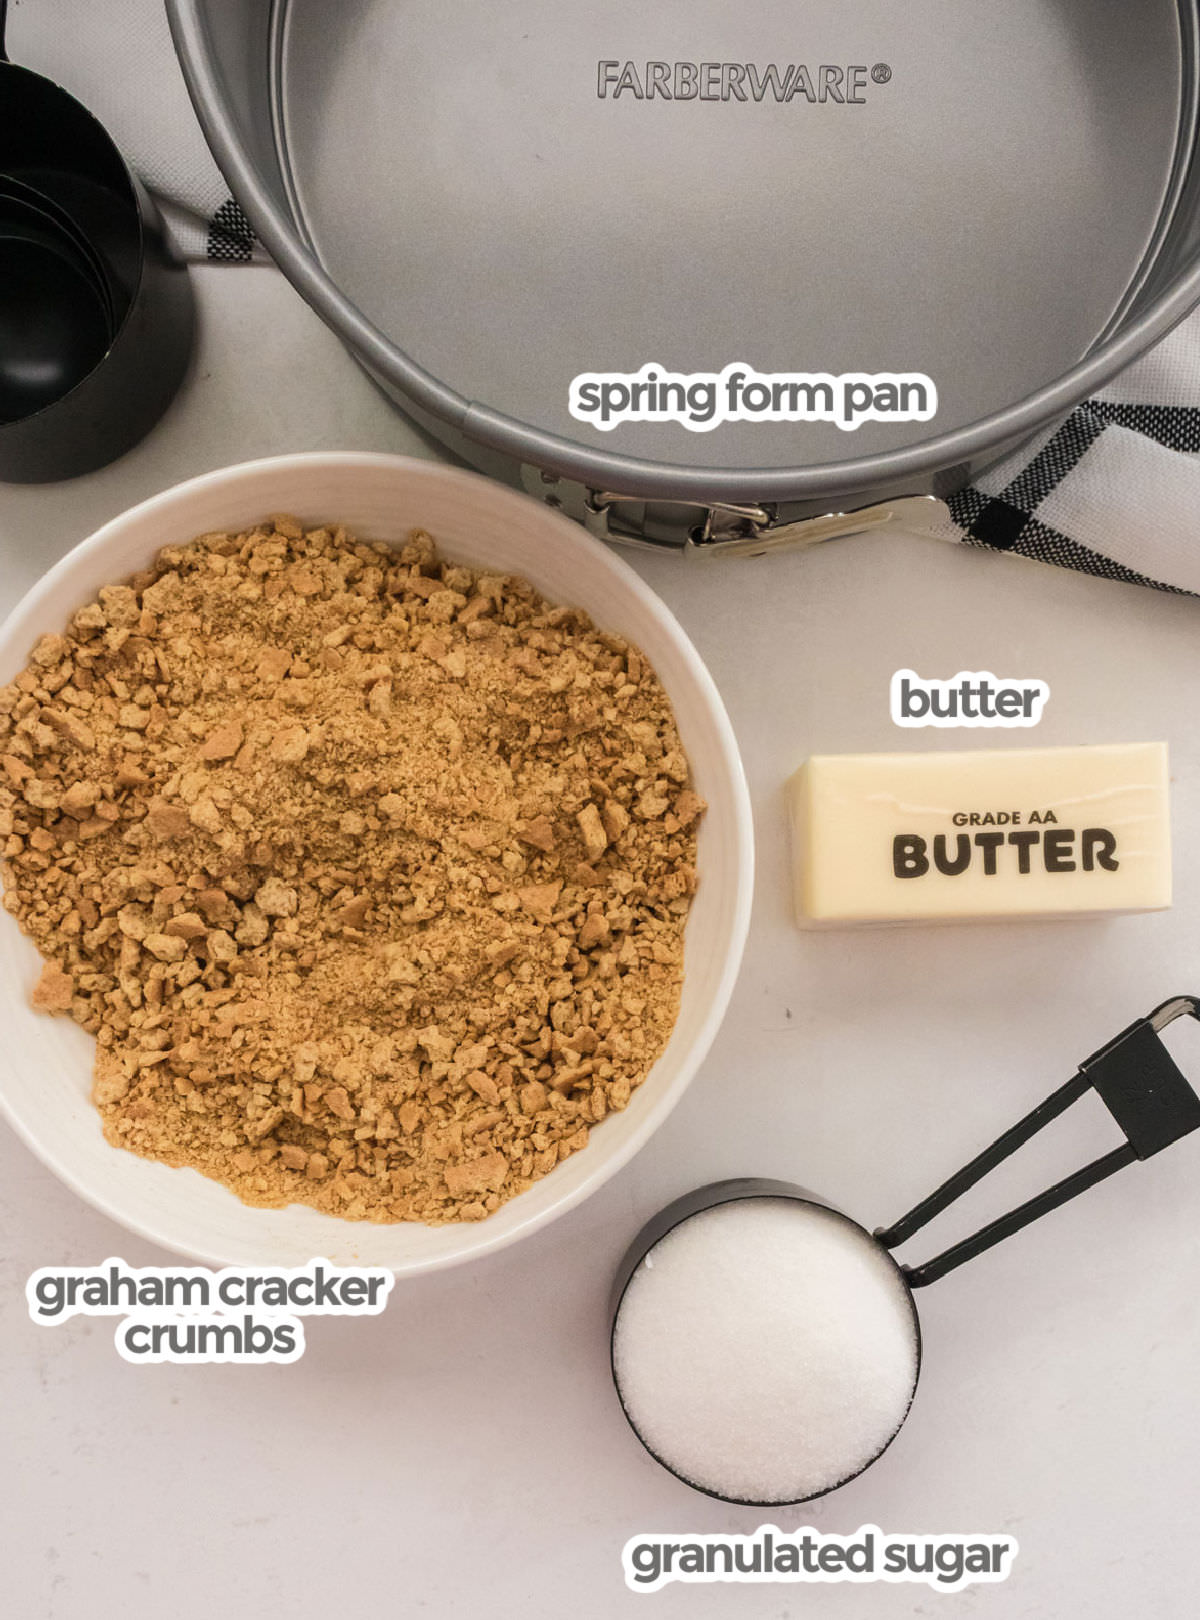 All the ingredients required to make a Graham Cracker Crust including graham cracker crumbs, butter, sugar and a springform pan.